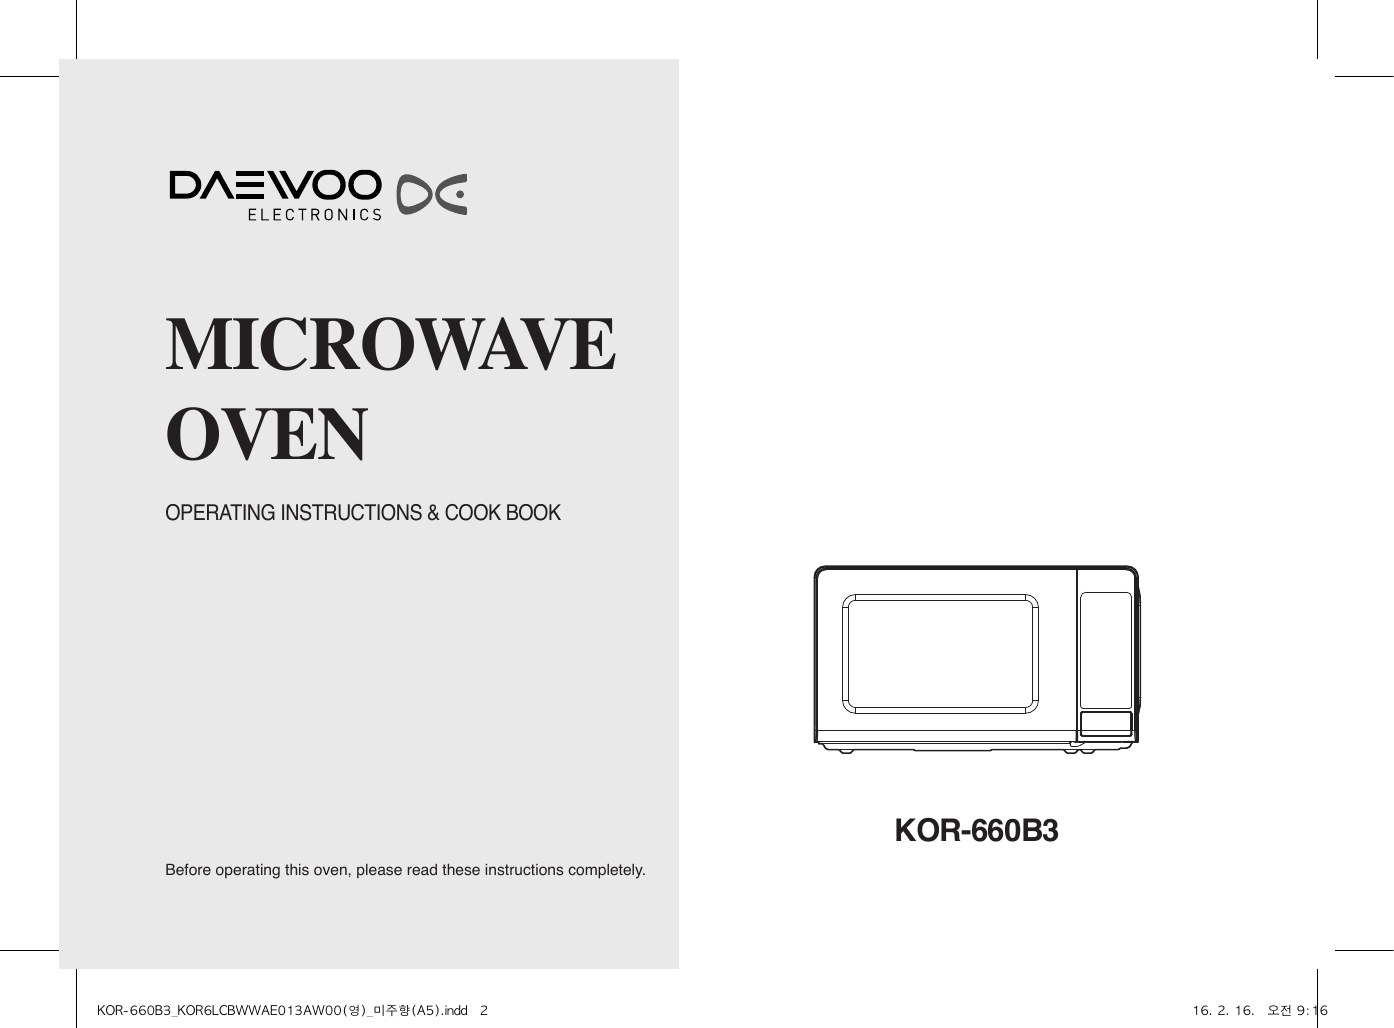 Before operating this oven, please read these instructions completely.OPERATING INSTRUCTIONS &amp; COOK BOOKMICROWAVEOVENKOR-660B3KOR-660B3_KOR6LCBWWAE013AW00(영)_미주향(A5).indd   2 16. 2. 16.   오전 9:16